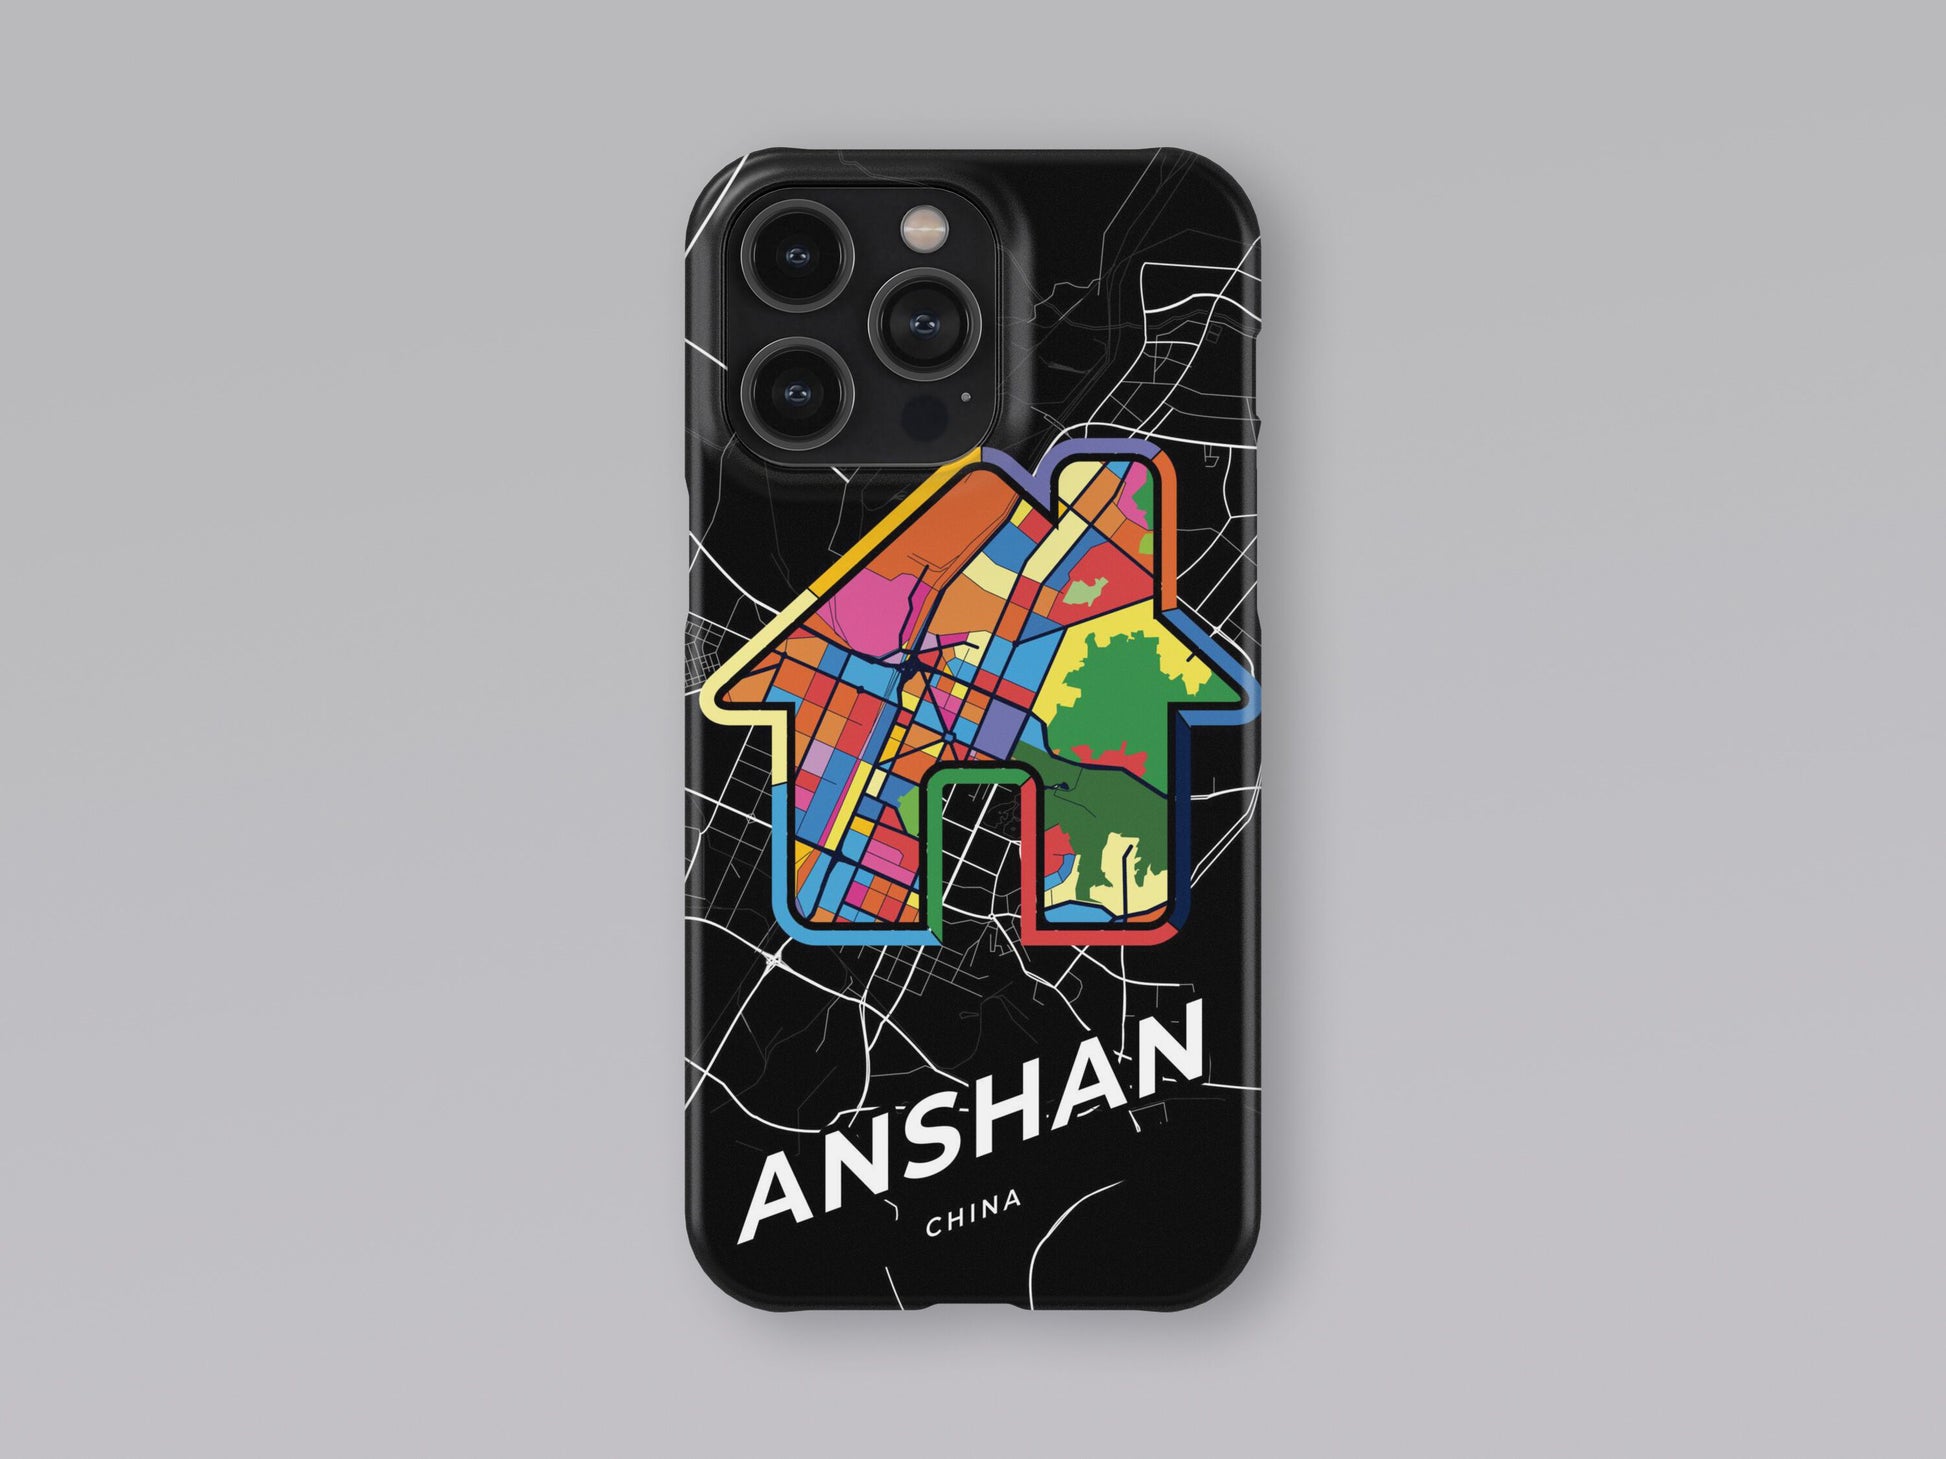 Anshan China slim phone case with colorful icon. Birthday, wedding or housewarming gift. Couple match cases. 3